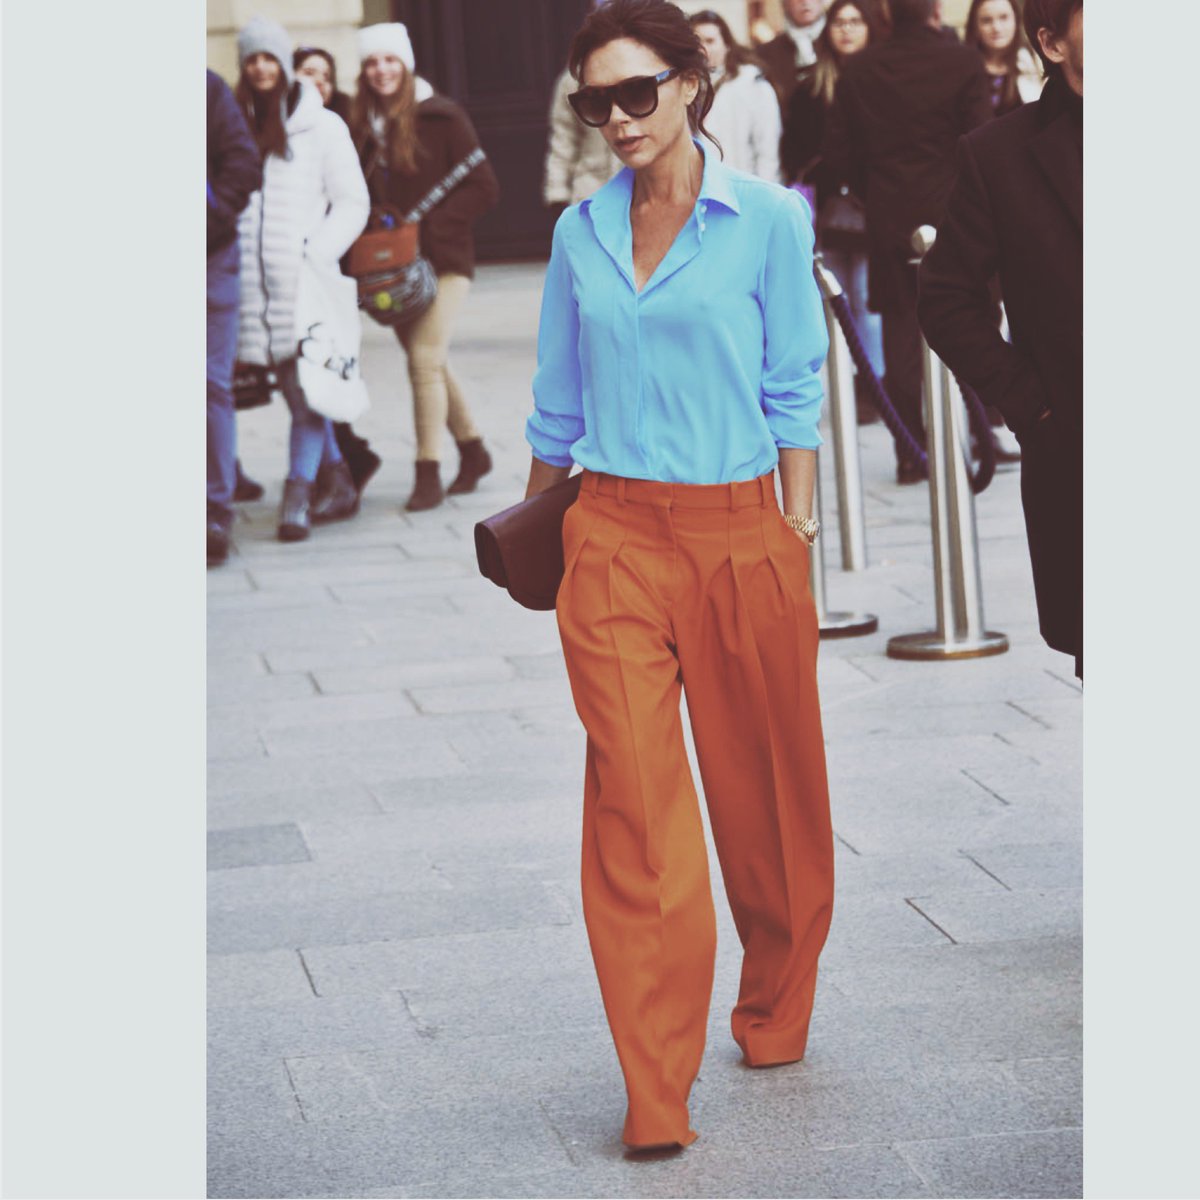 Loving these two colours together 😍😍 #widelegtrousers #summer #pleasegiveussomesun #victoriabeckham #kollectivekloset #workitworkit